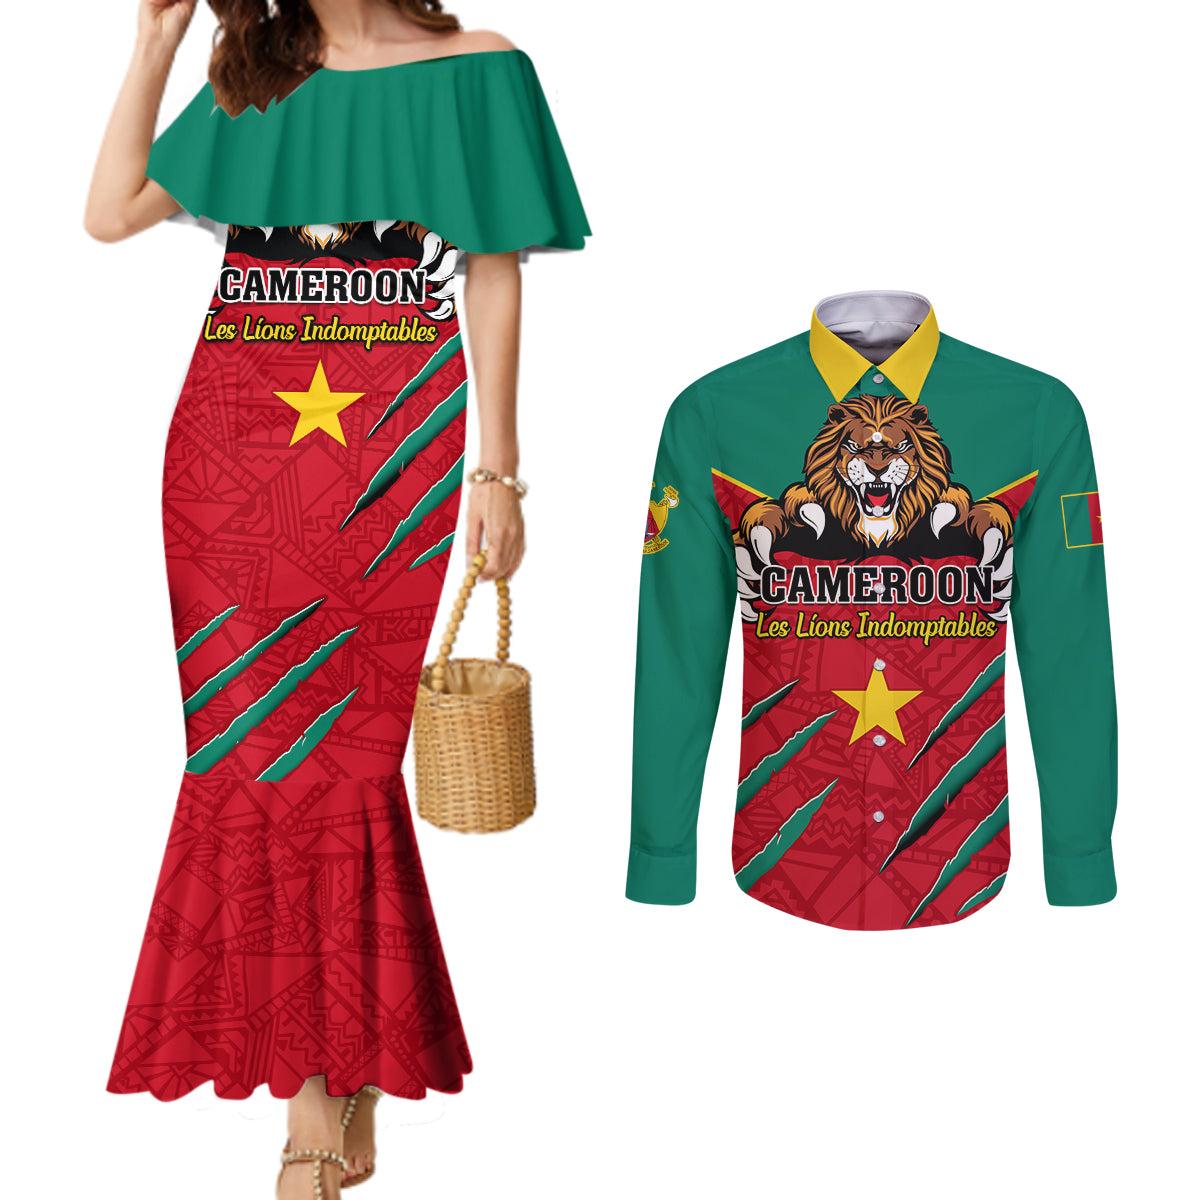 Cameroon Football Couples Matching Mermaid Dress and Long Sleeve Button Shirt Go Les Lions Indomptables